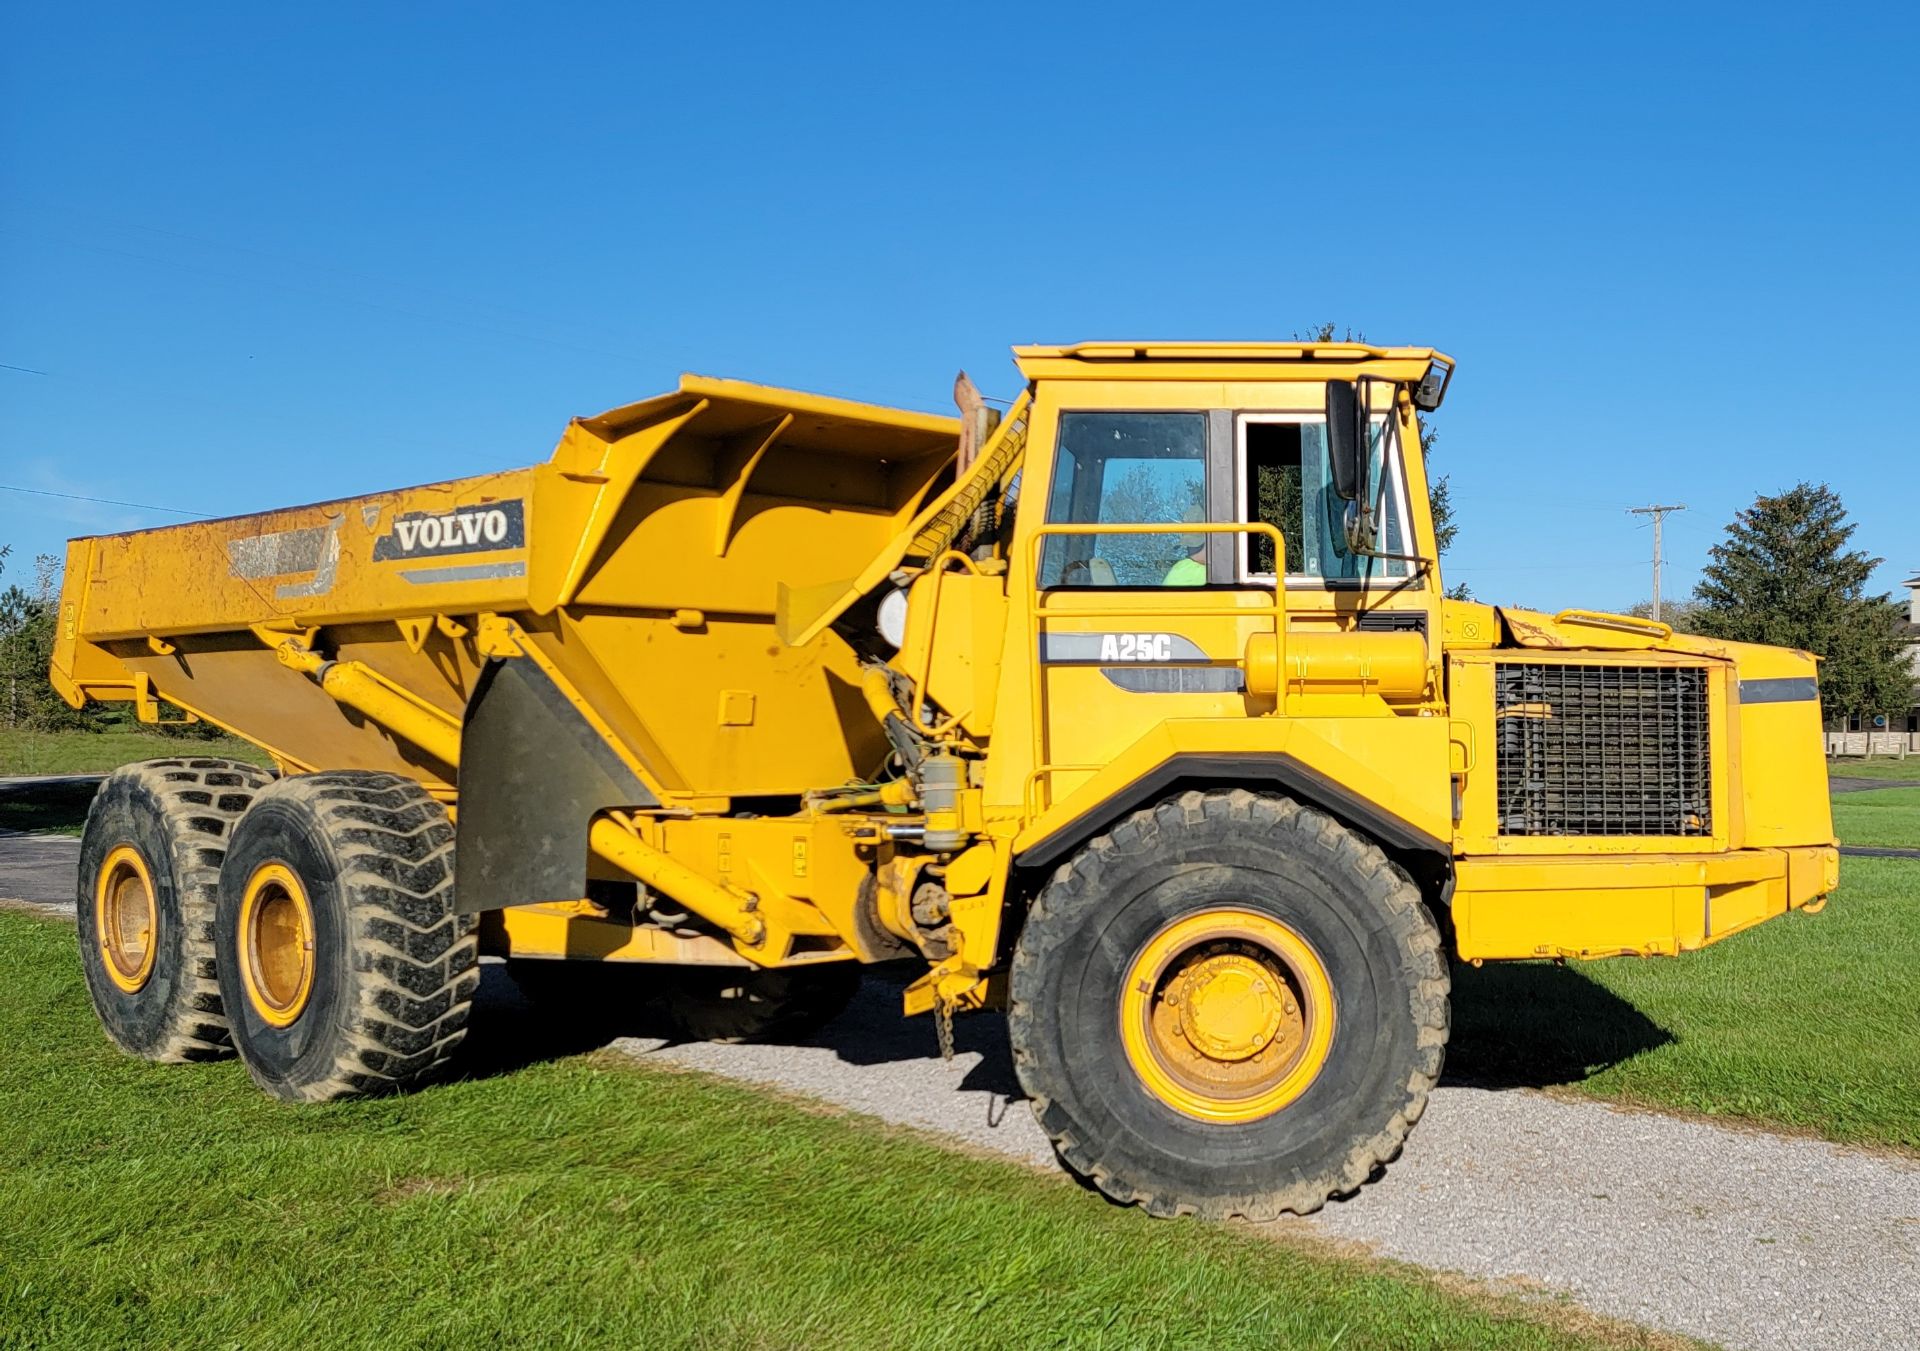 Volvo A25C 6x6 Offroad Dump Truck, 30,519 Miles, 12,411 Hours, s/n 5350V61011 - Image 15 of 34